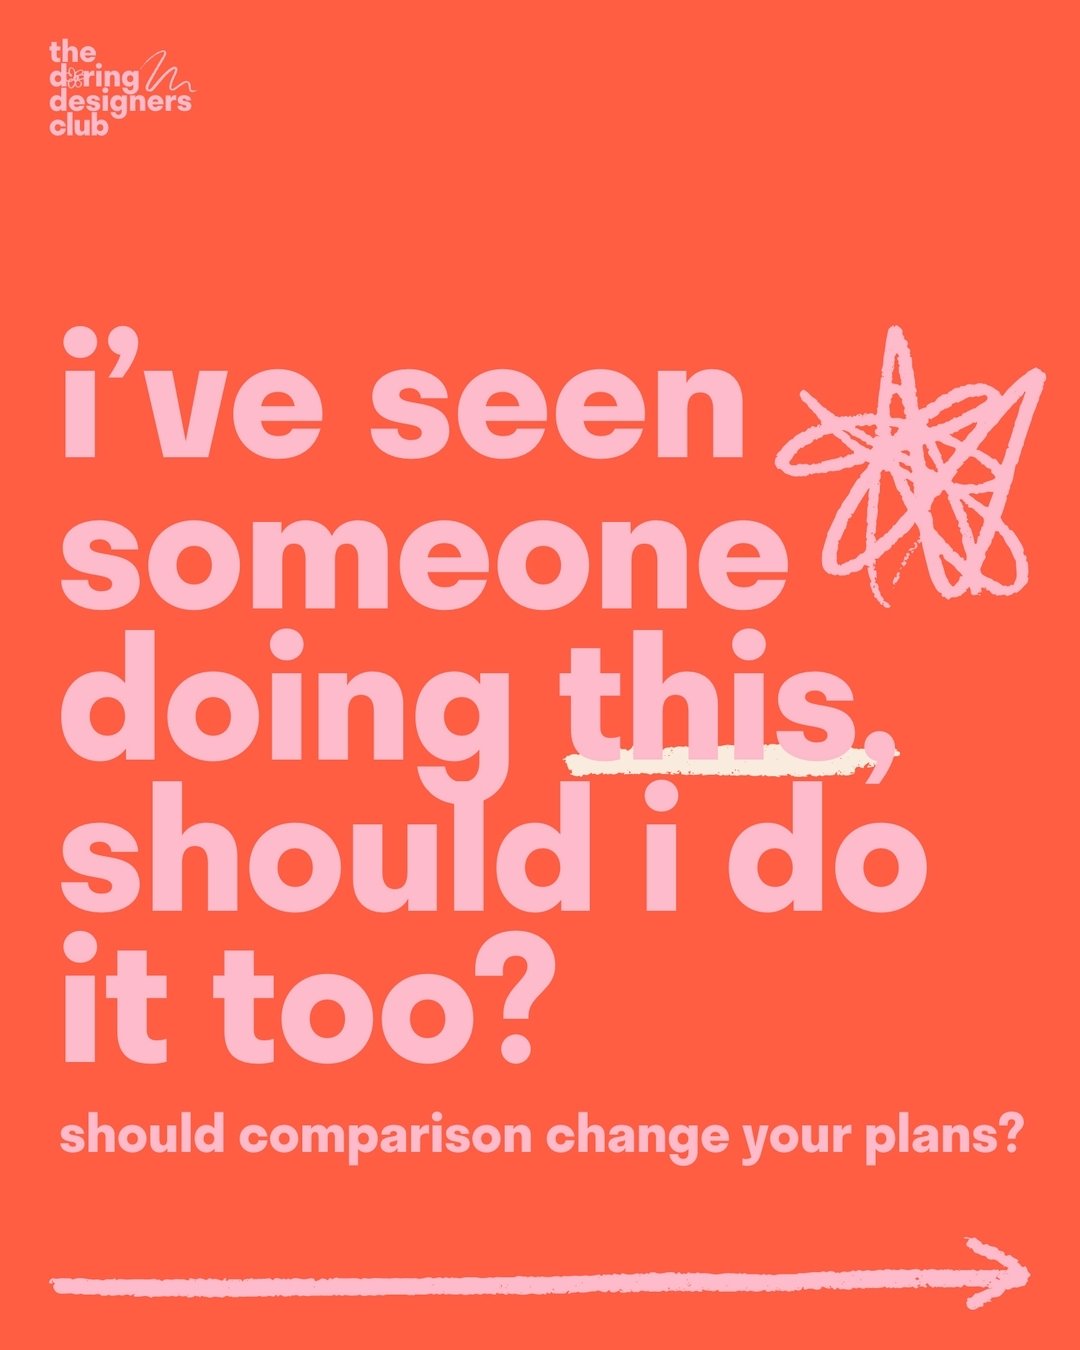 Here&rsquo;s a question I get asked a lot as a mentor:

&ldquo;I&rsquo;ve seen someone _____ (fill in the strategy here!) would that work for me too?&rdquo;

The blank strategy could be absolutely anything, like:

✨ Using a set process with clients

